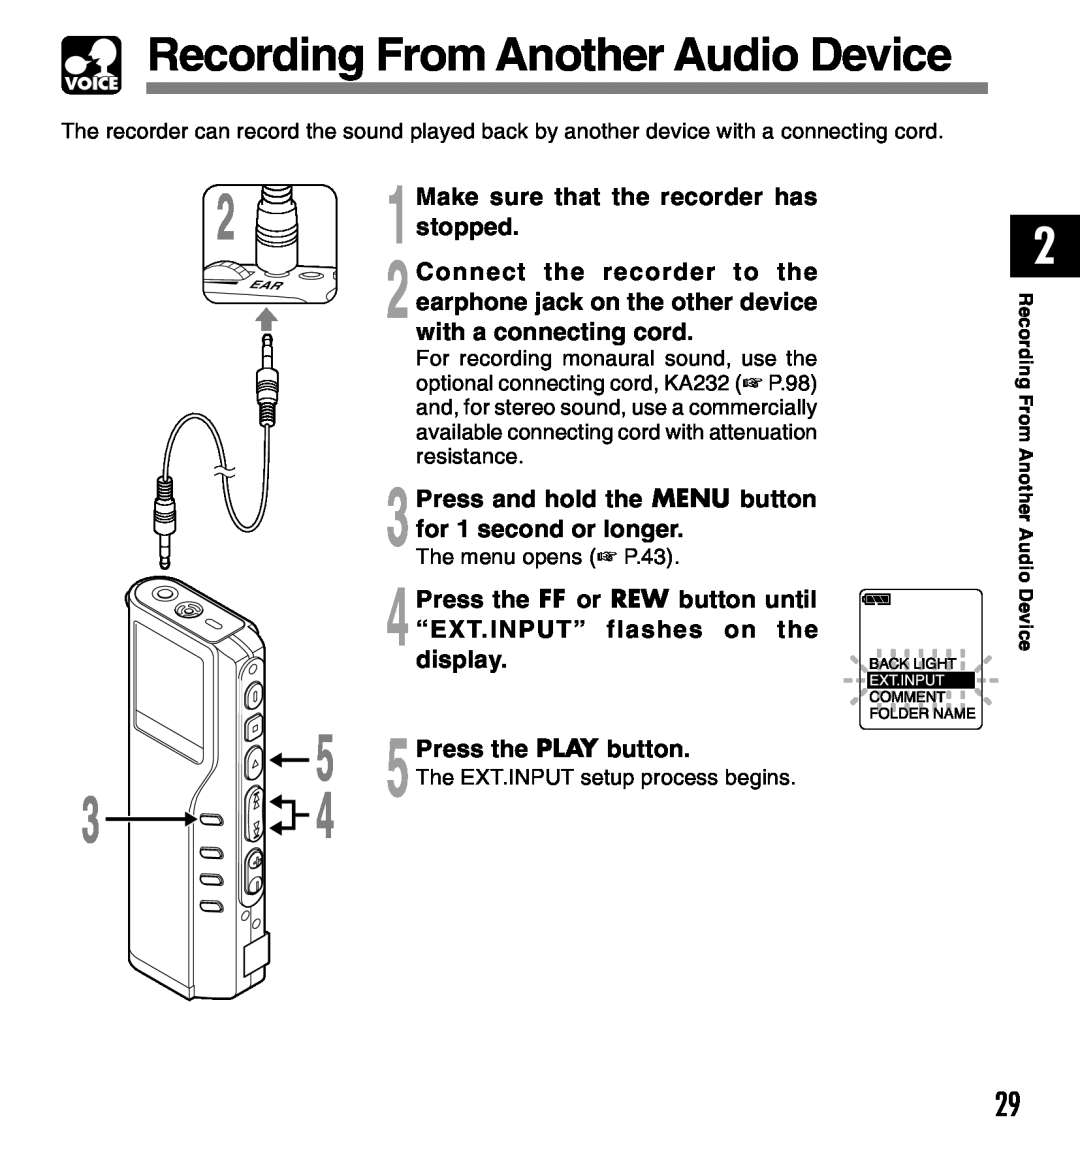 Olympus DM-20, DM-10 manual Recording From Another Audio Device, 1Make sure that the recorder has 2 stopped, display 